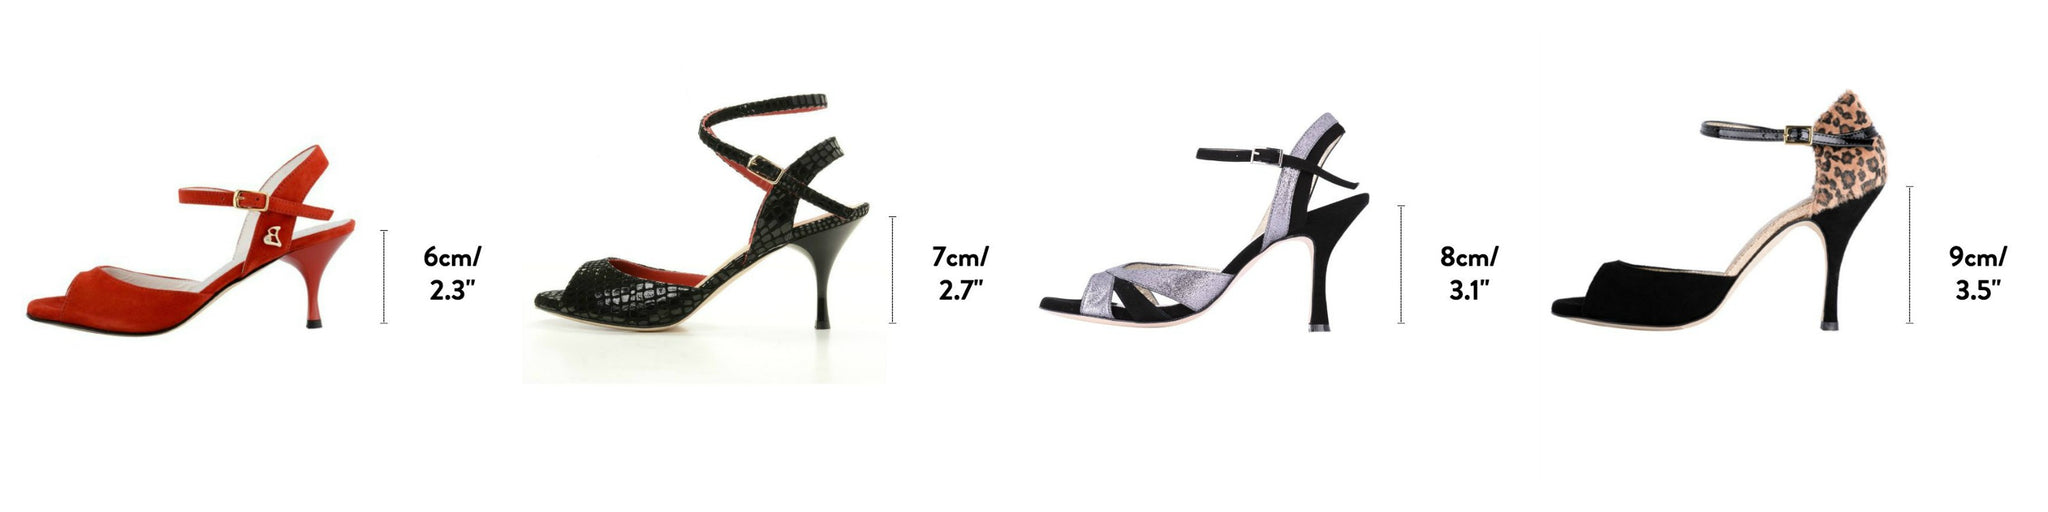 Argentine Tango Dance Shoes Sizing Guide - Axis Tango